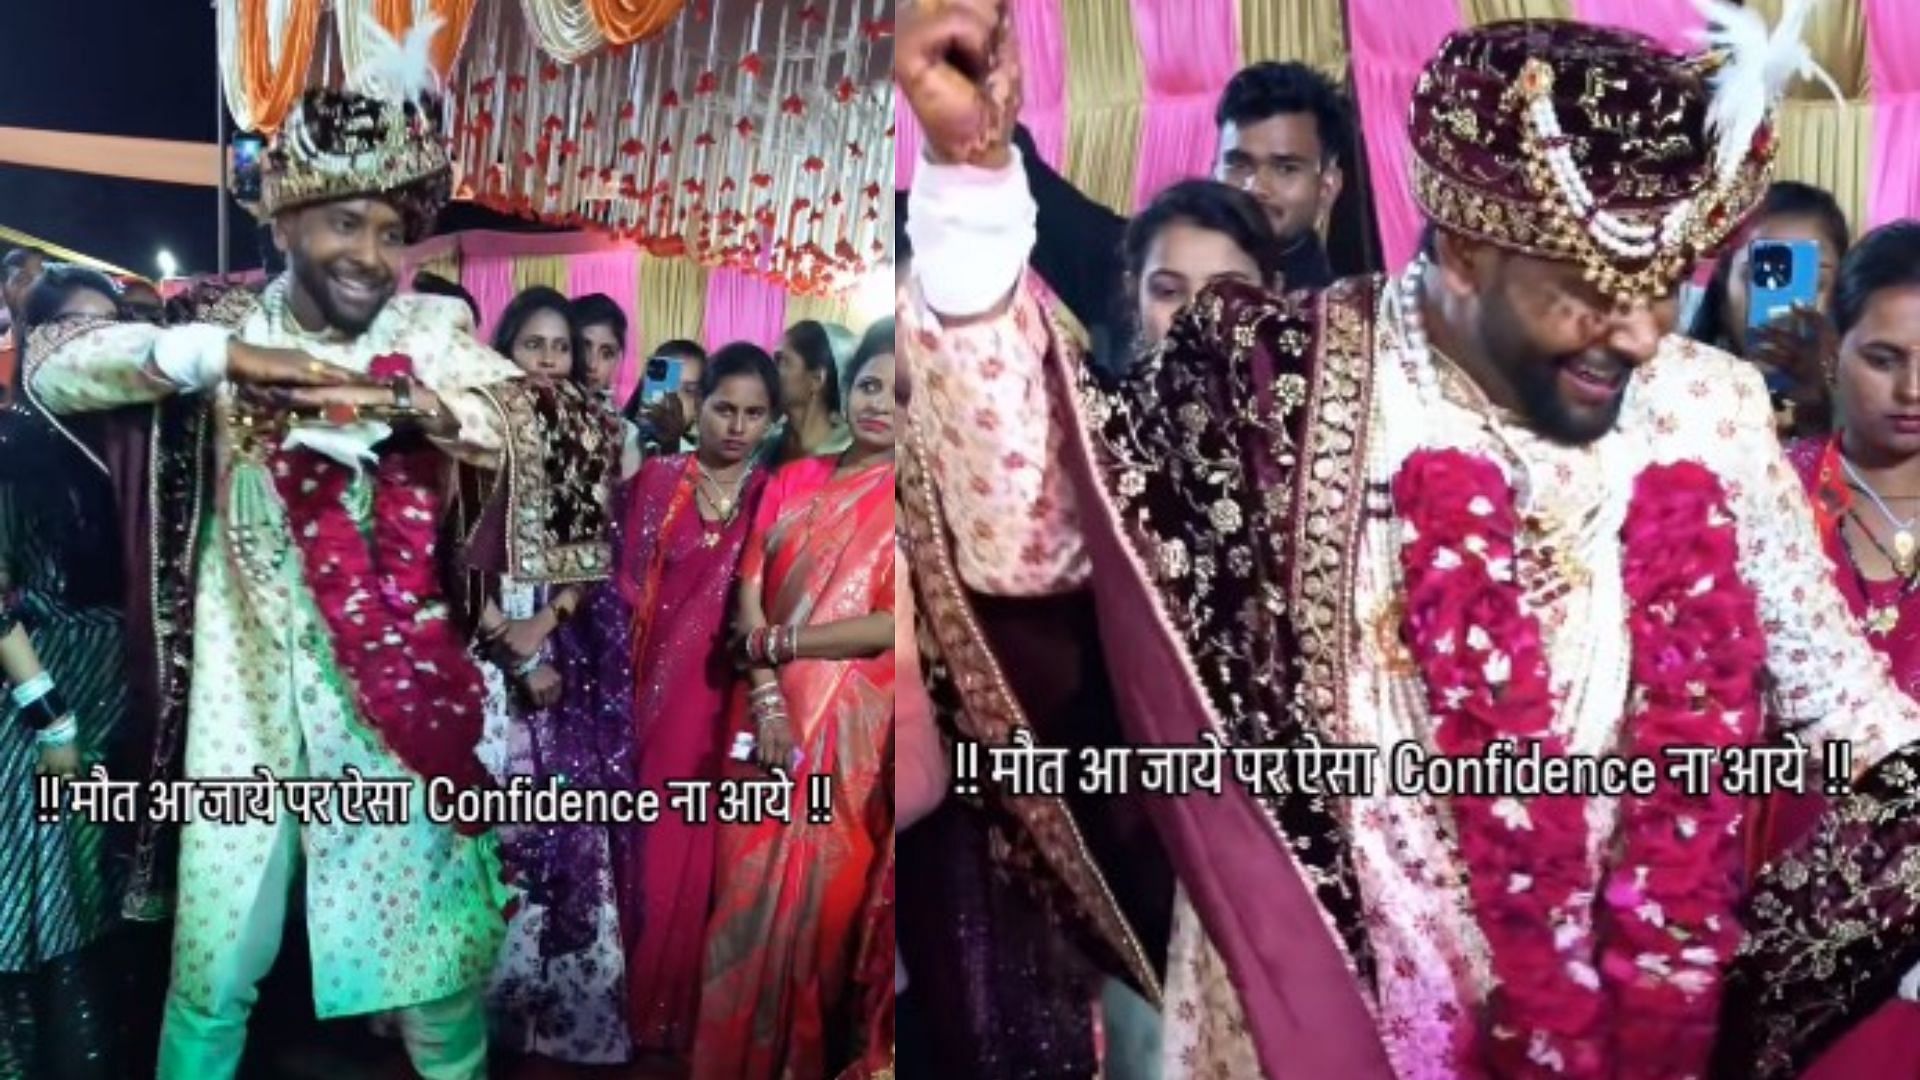 Funny dance video of groom danced hilariously in front of his bride